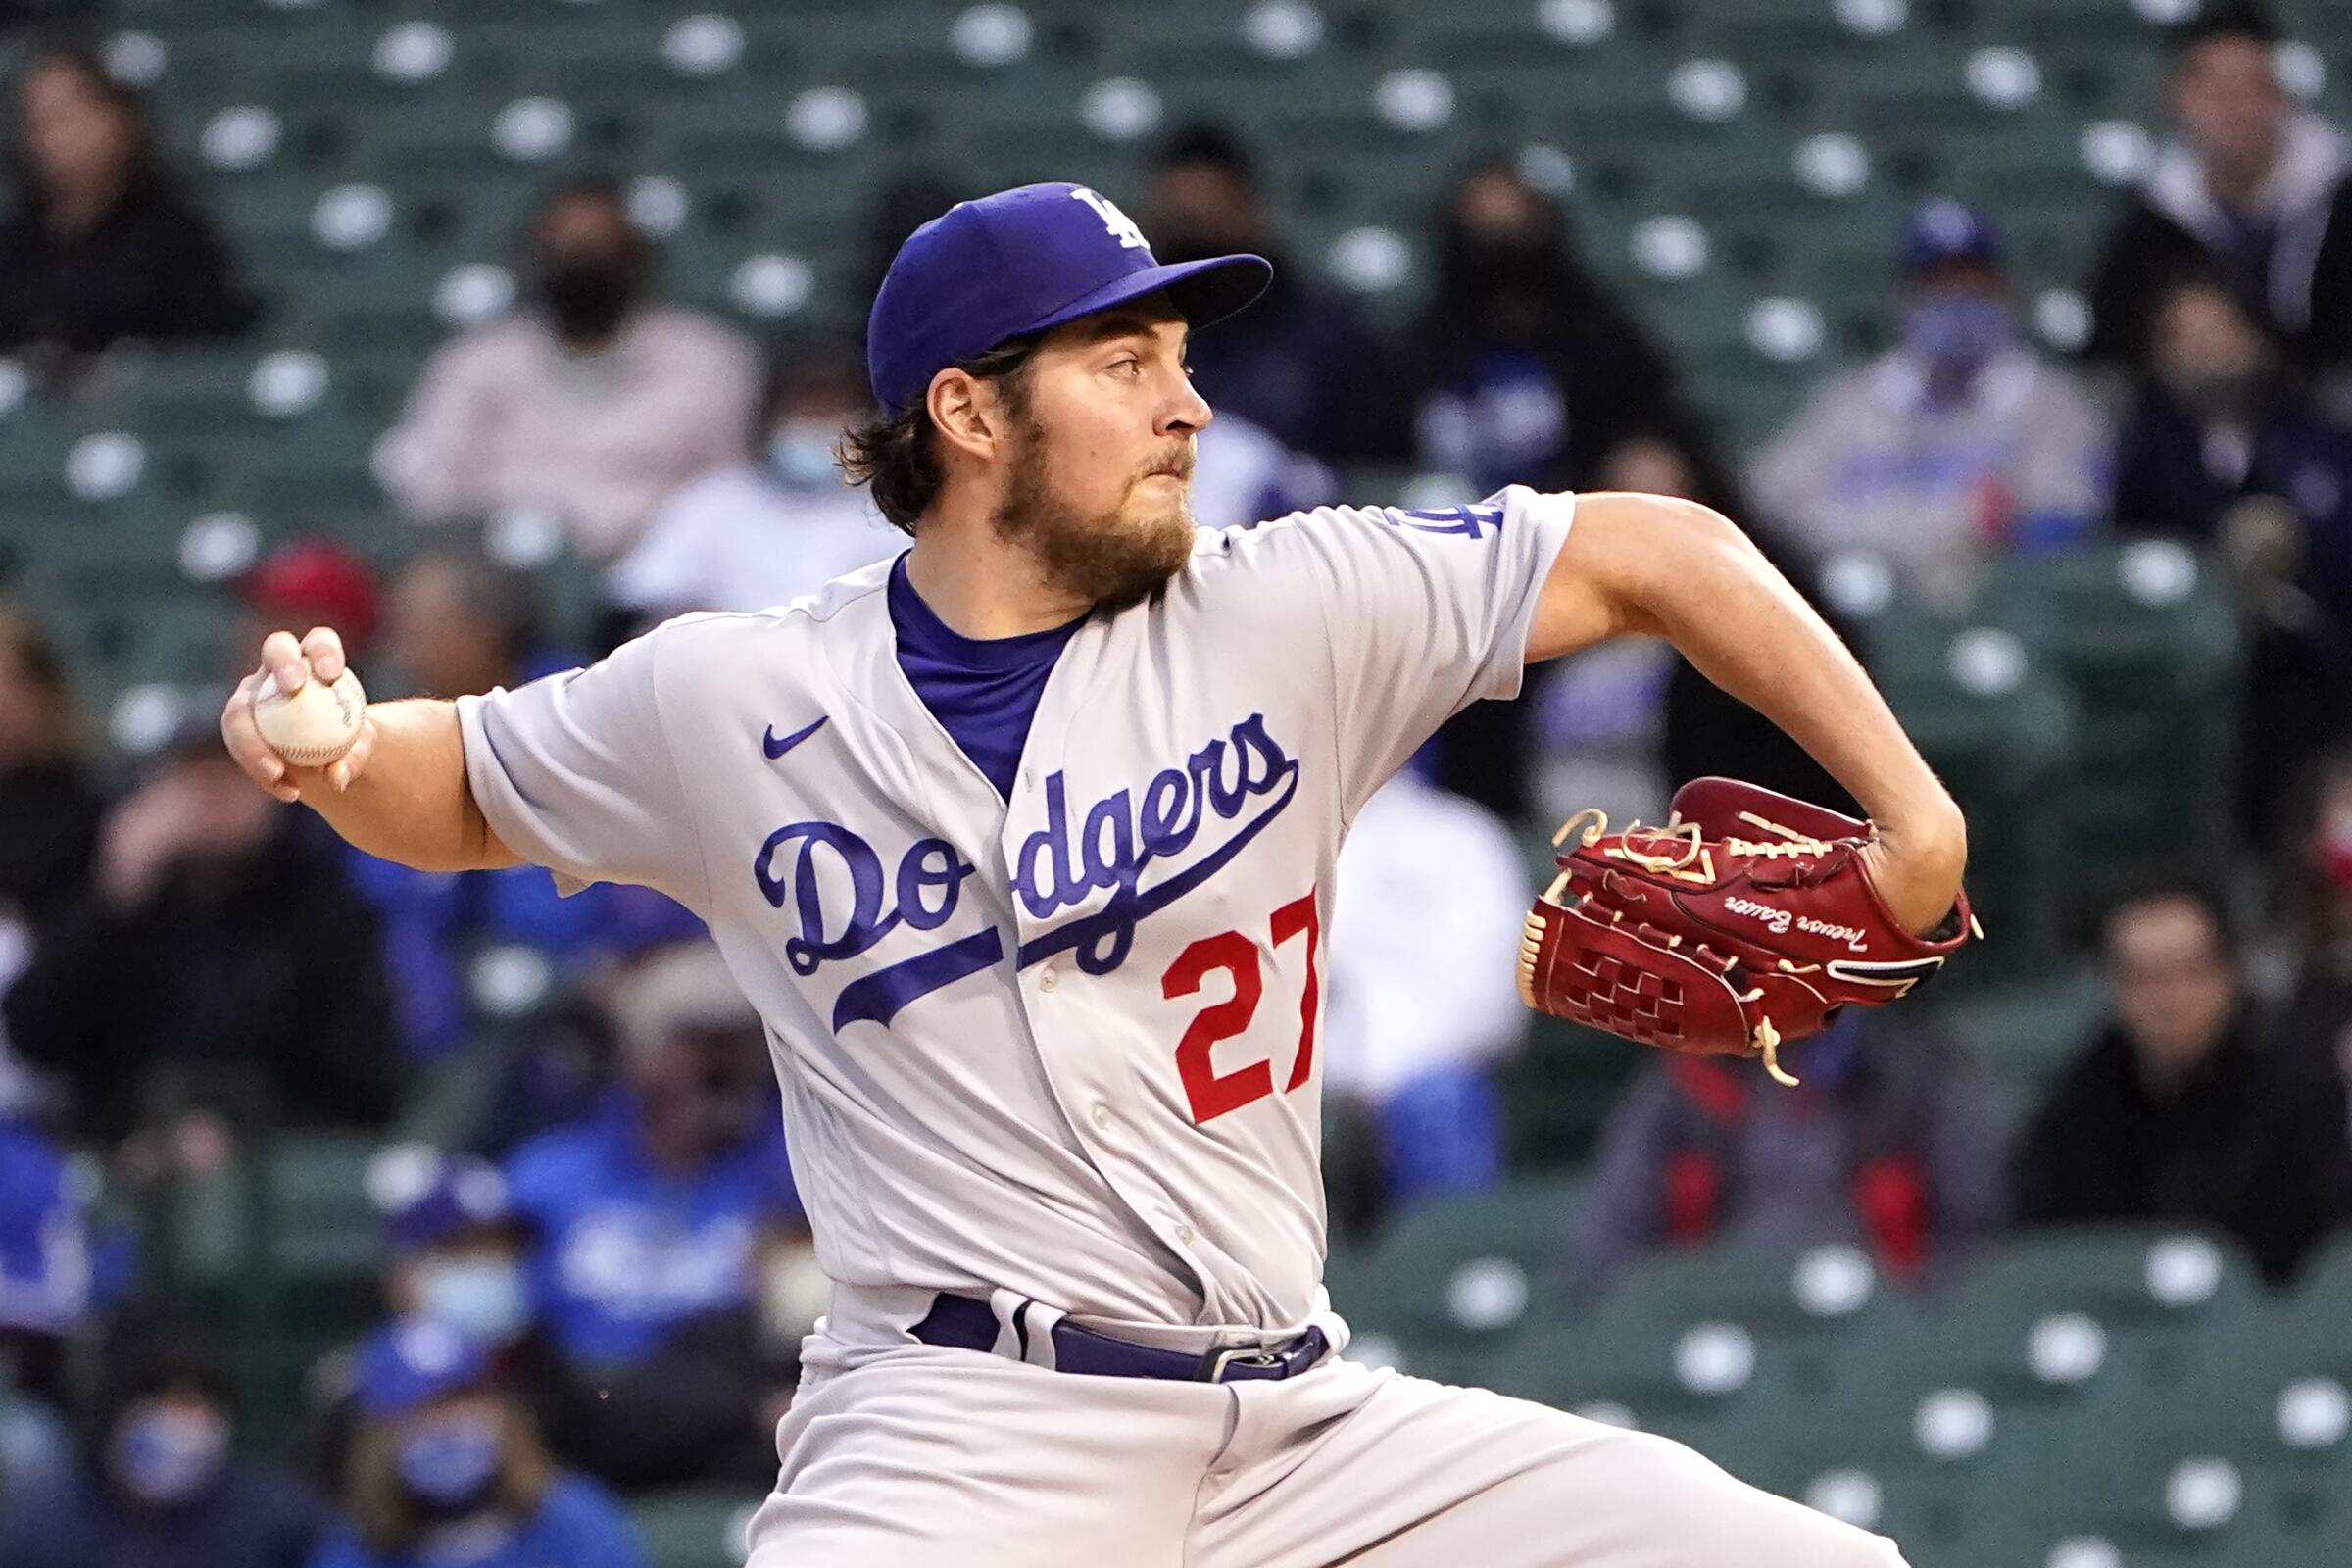 Dodgers starting pitcher Trevor Bauer delivers during a game against the Chicago Cubs in May 2021.